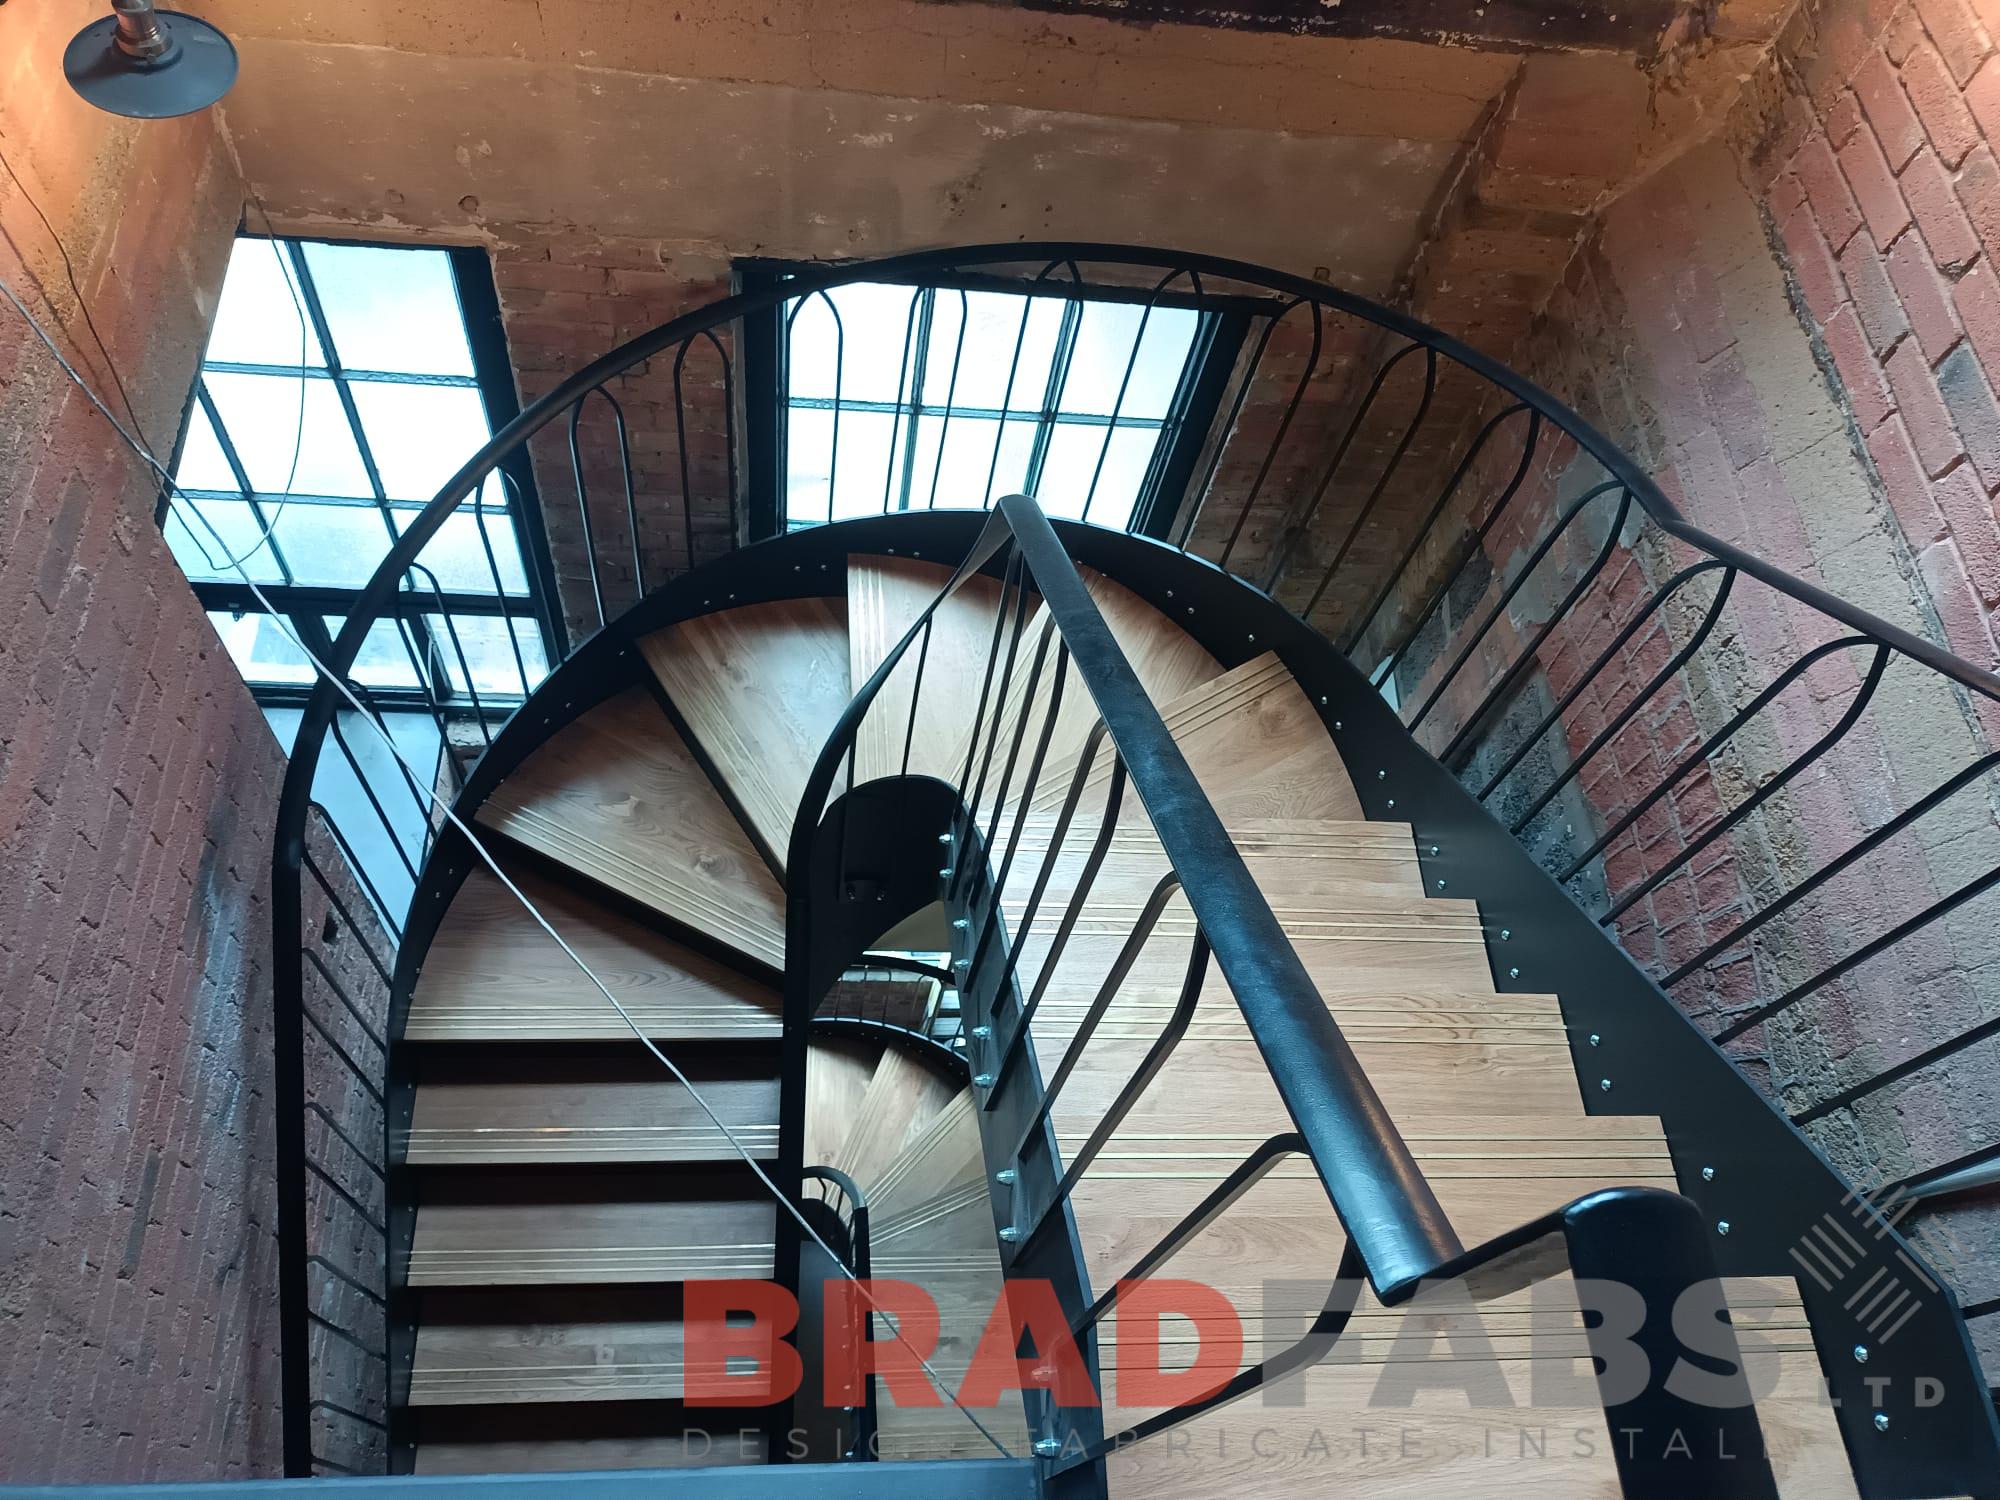 Bradfabs, helical staircase, helix staircase, internal staircase, steel fabrications, 